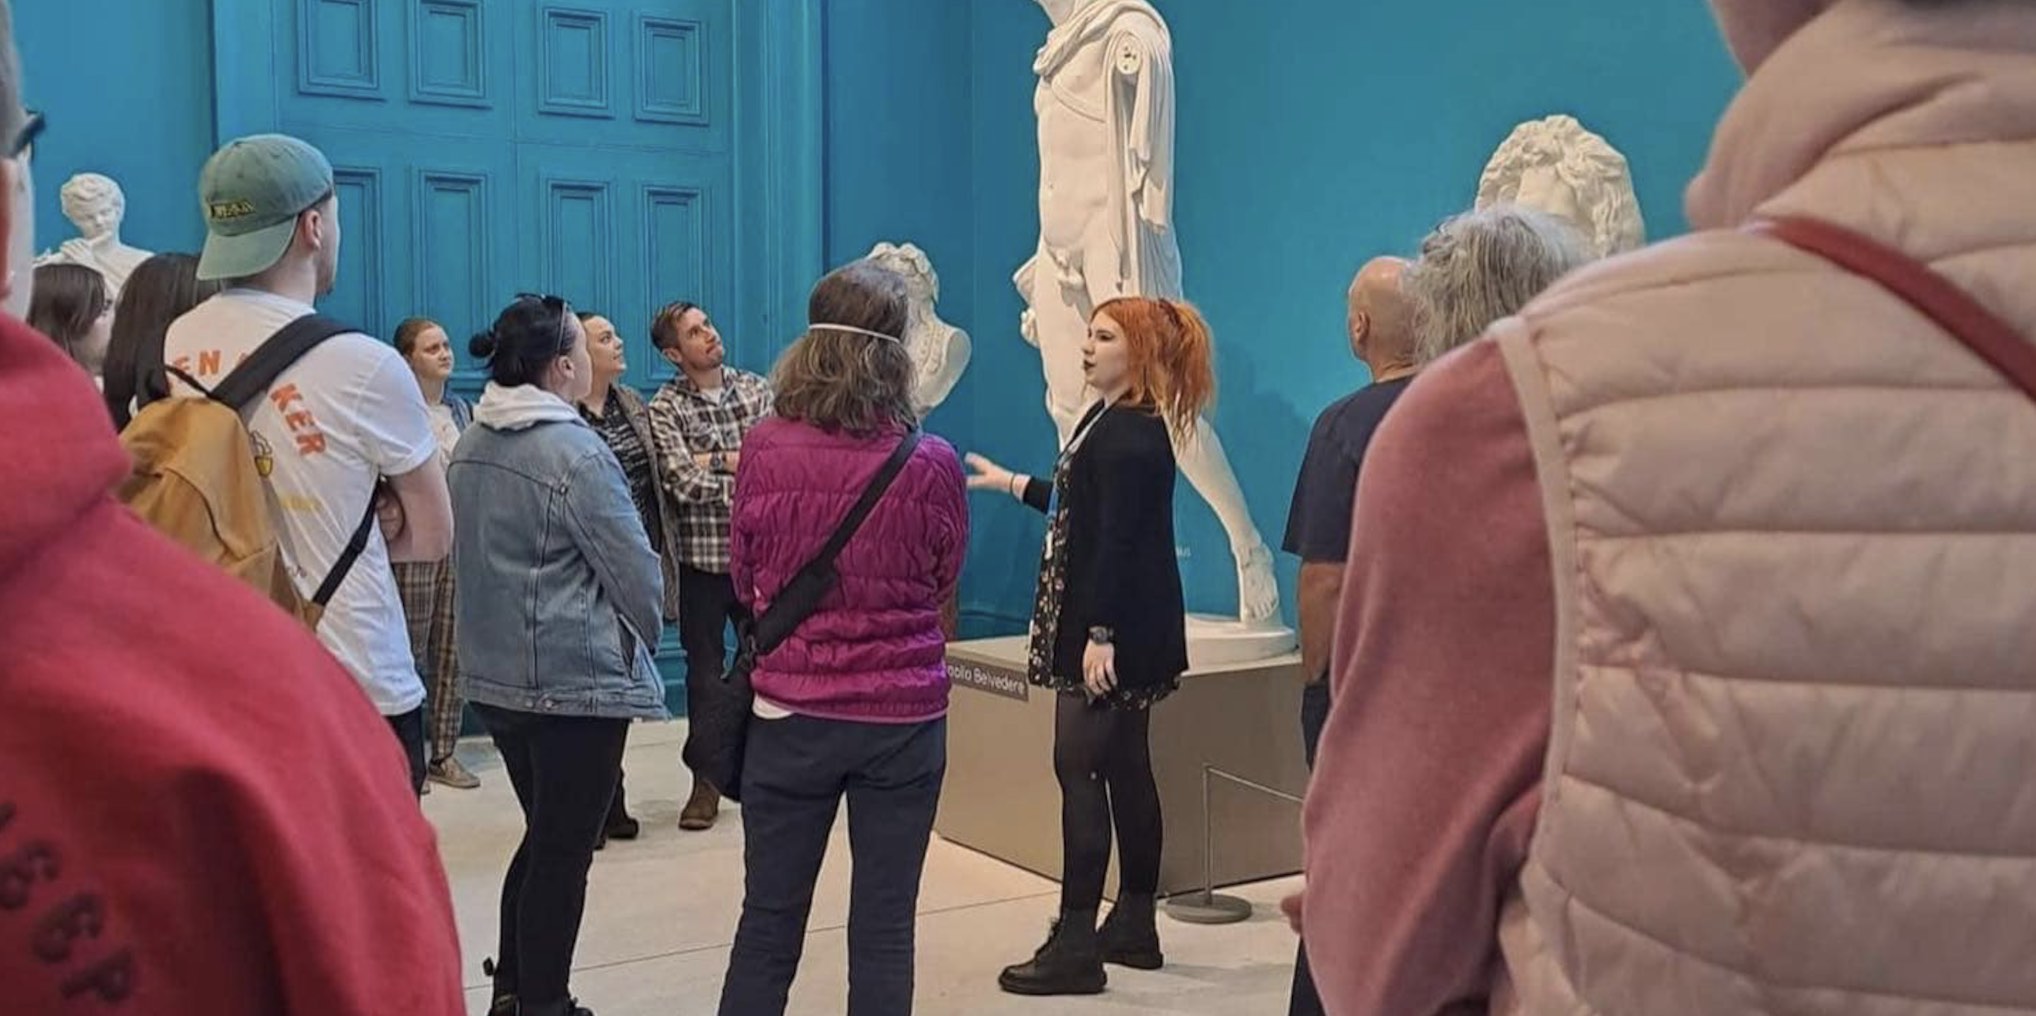 A tour guide is standing in front of tall, white, statue in a blue room talking to a group of people.